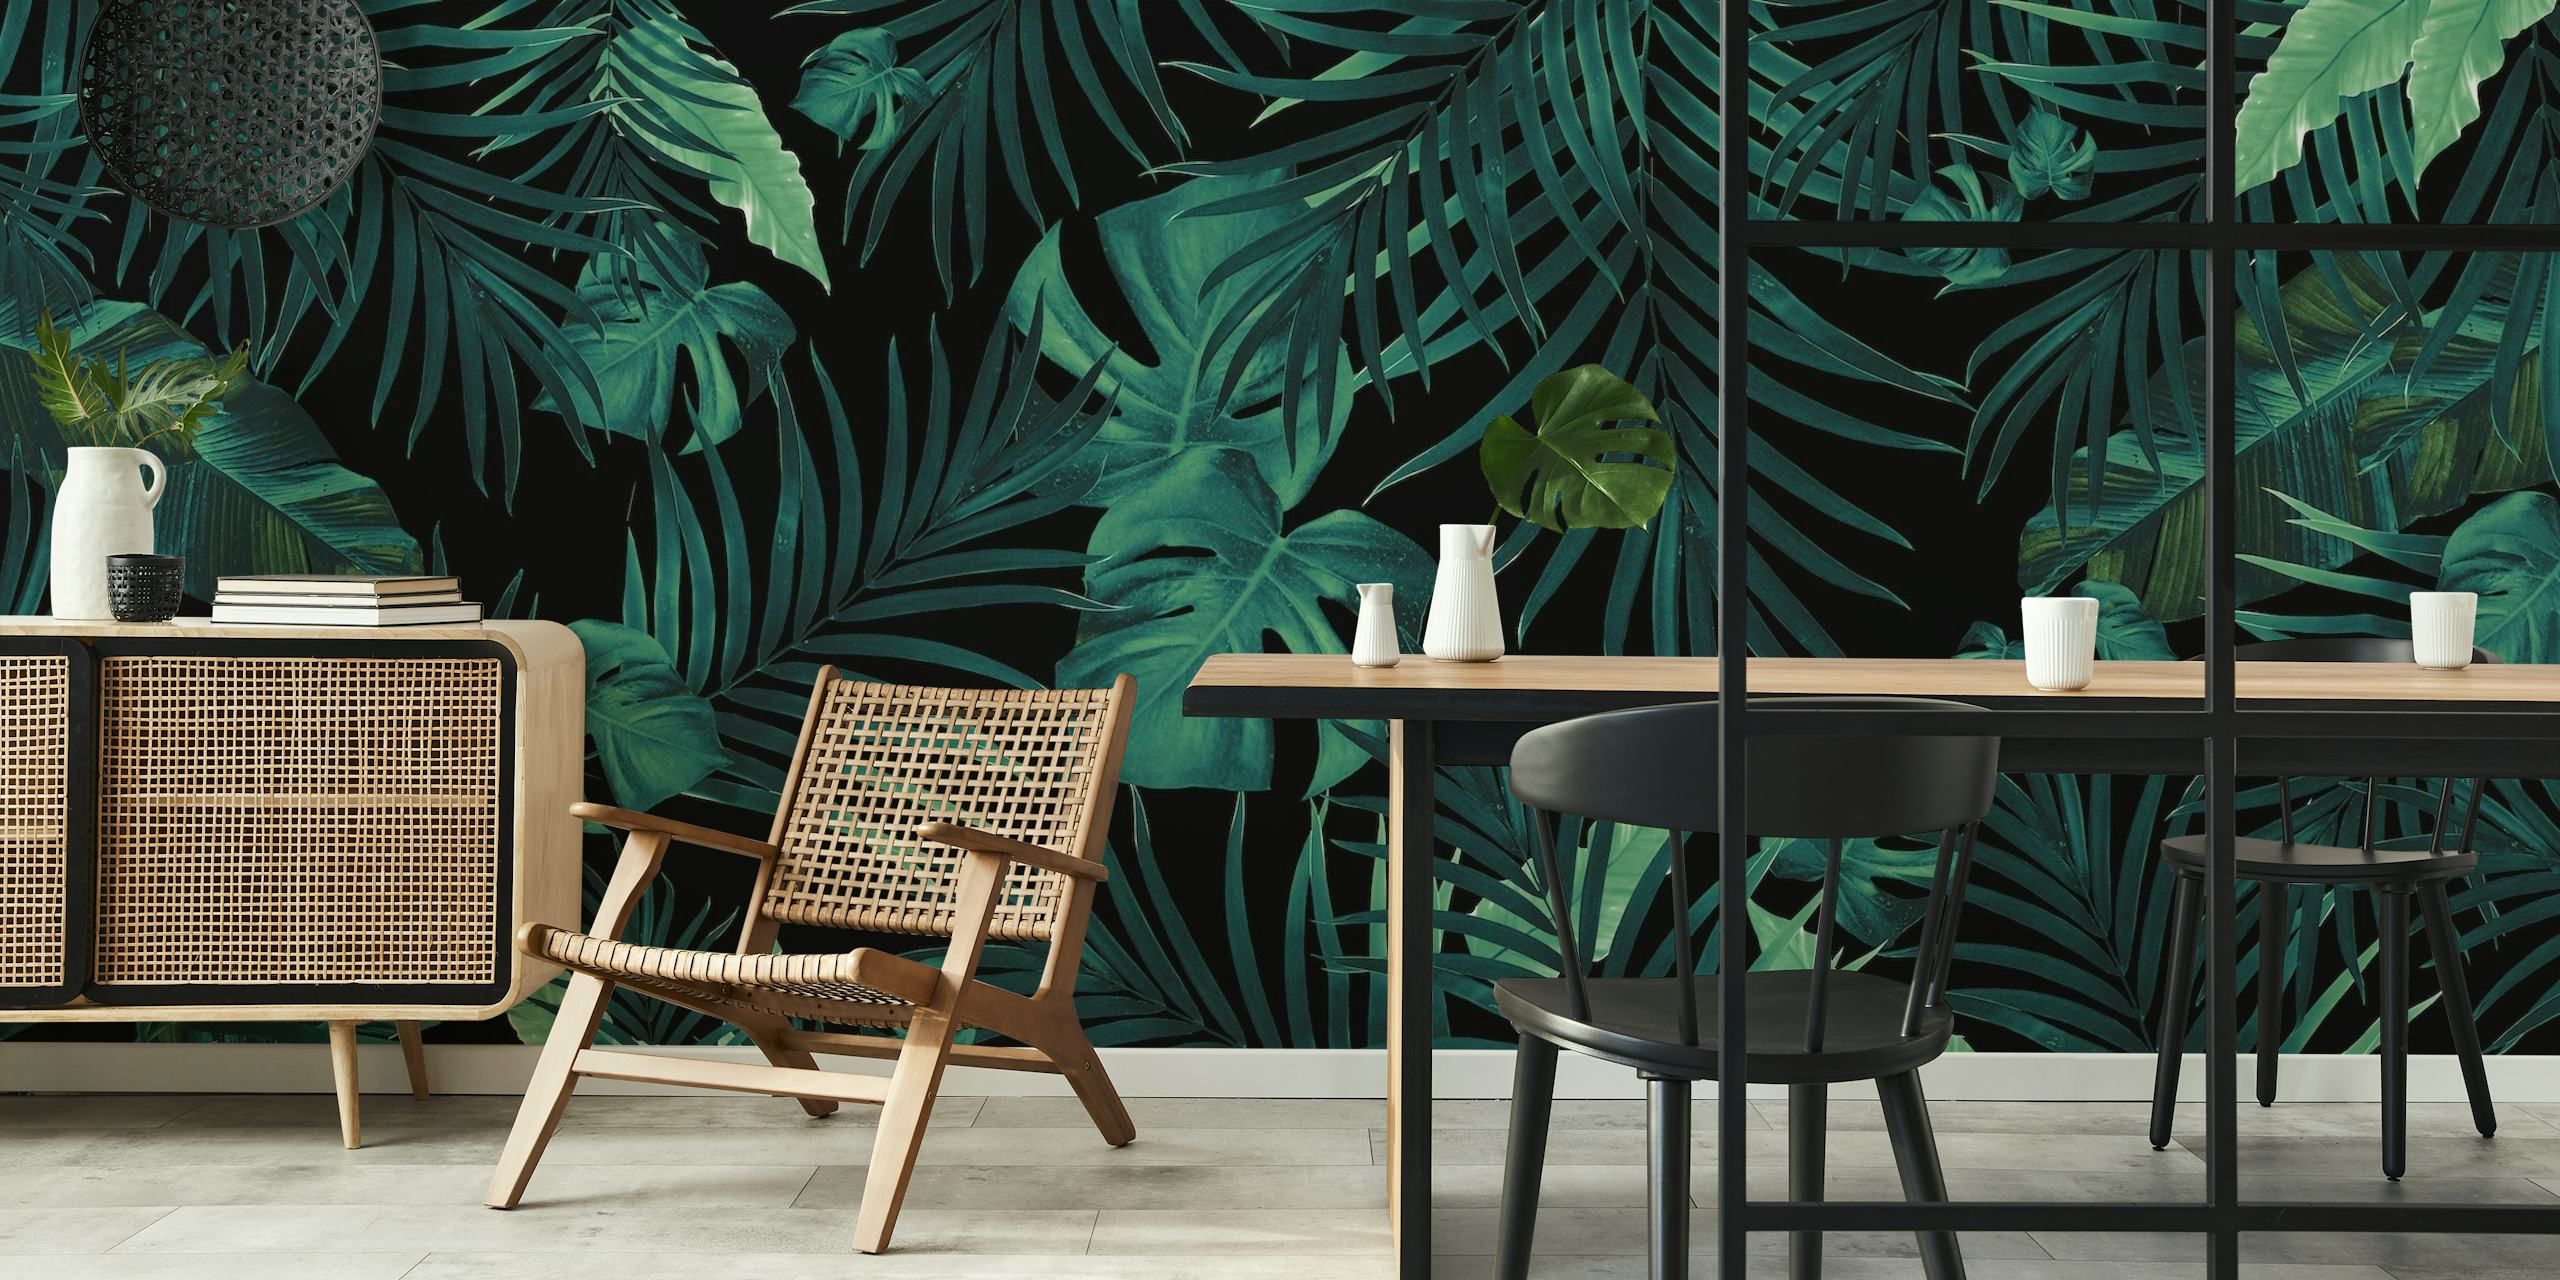 Tropical Jungle Night wallpaper featuring night-time hues of tropical leaves